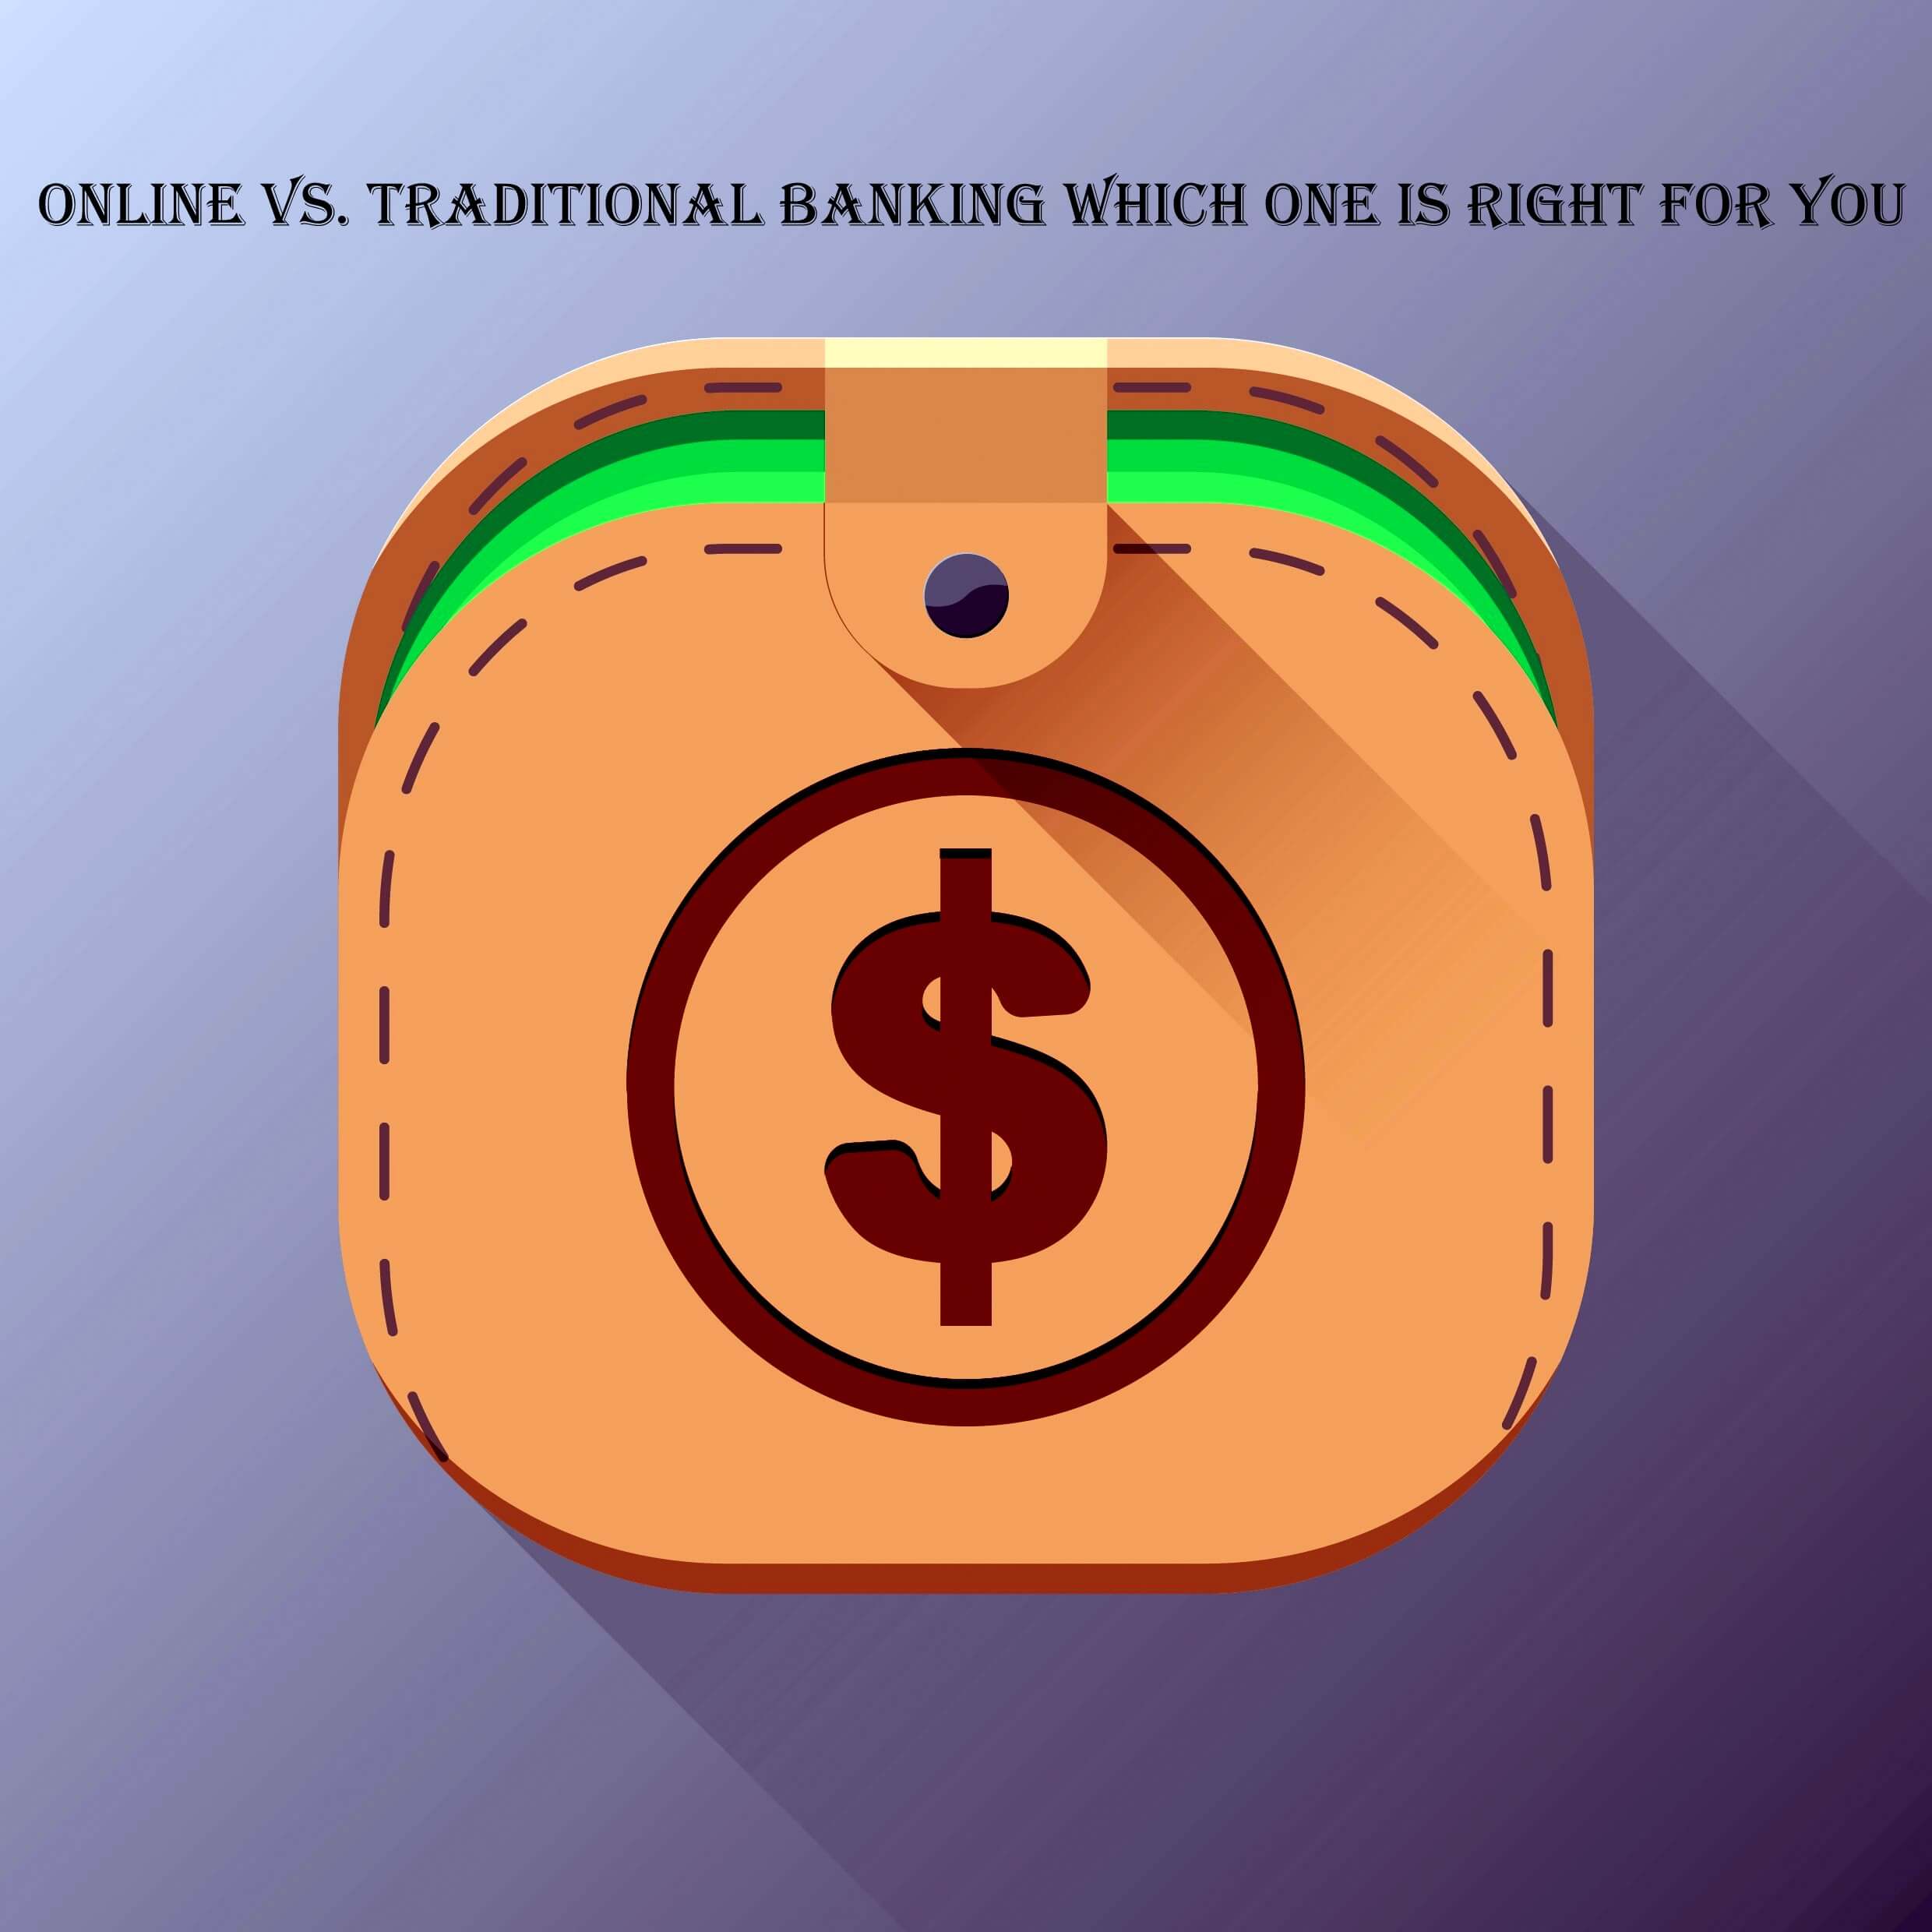 Online vs. Traditional Banking: Which One Is Right for You?